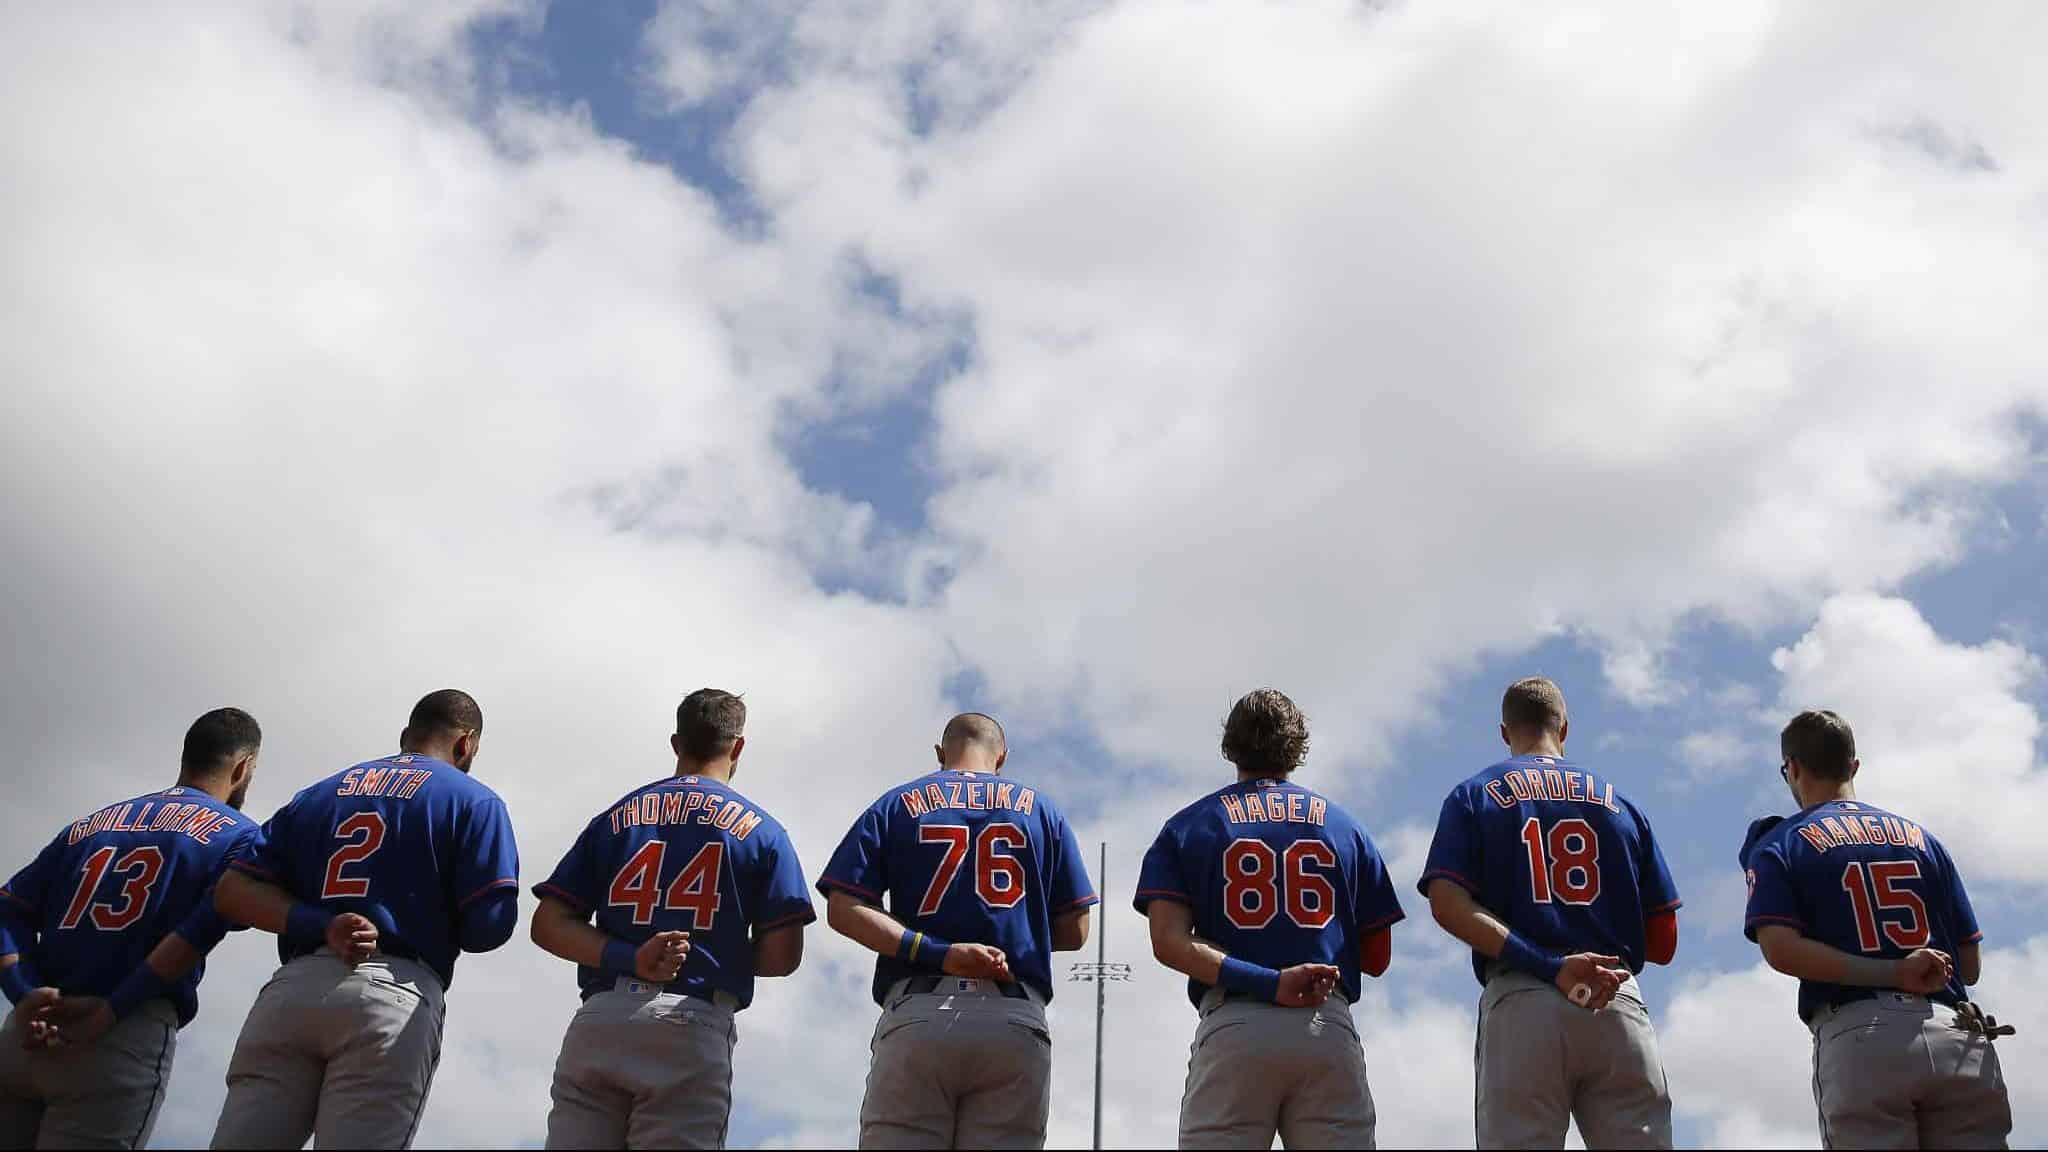 JUPITER, FLORIDA - FEBRUARY 22: The New York Mets observe the playing of the national anthem prior to a Grapefruit League spring training game against the St. Louis Cardinals at Roger Dean Stadium on February 22, 2020 in Jupiter, Florida.